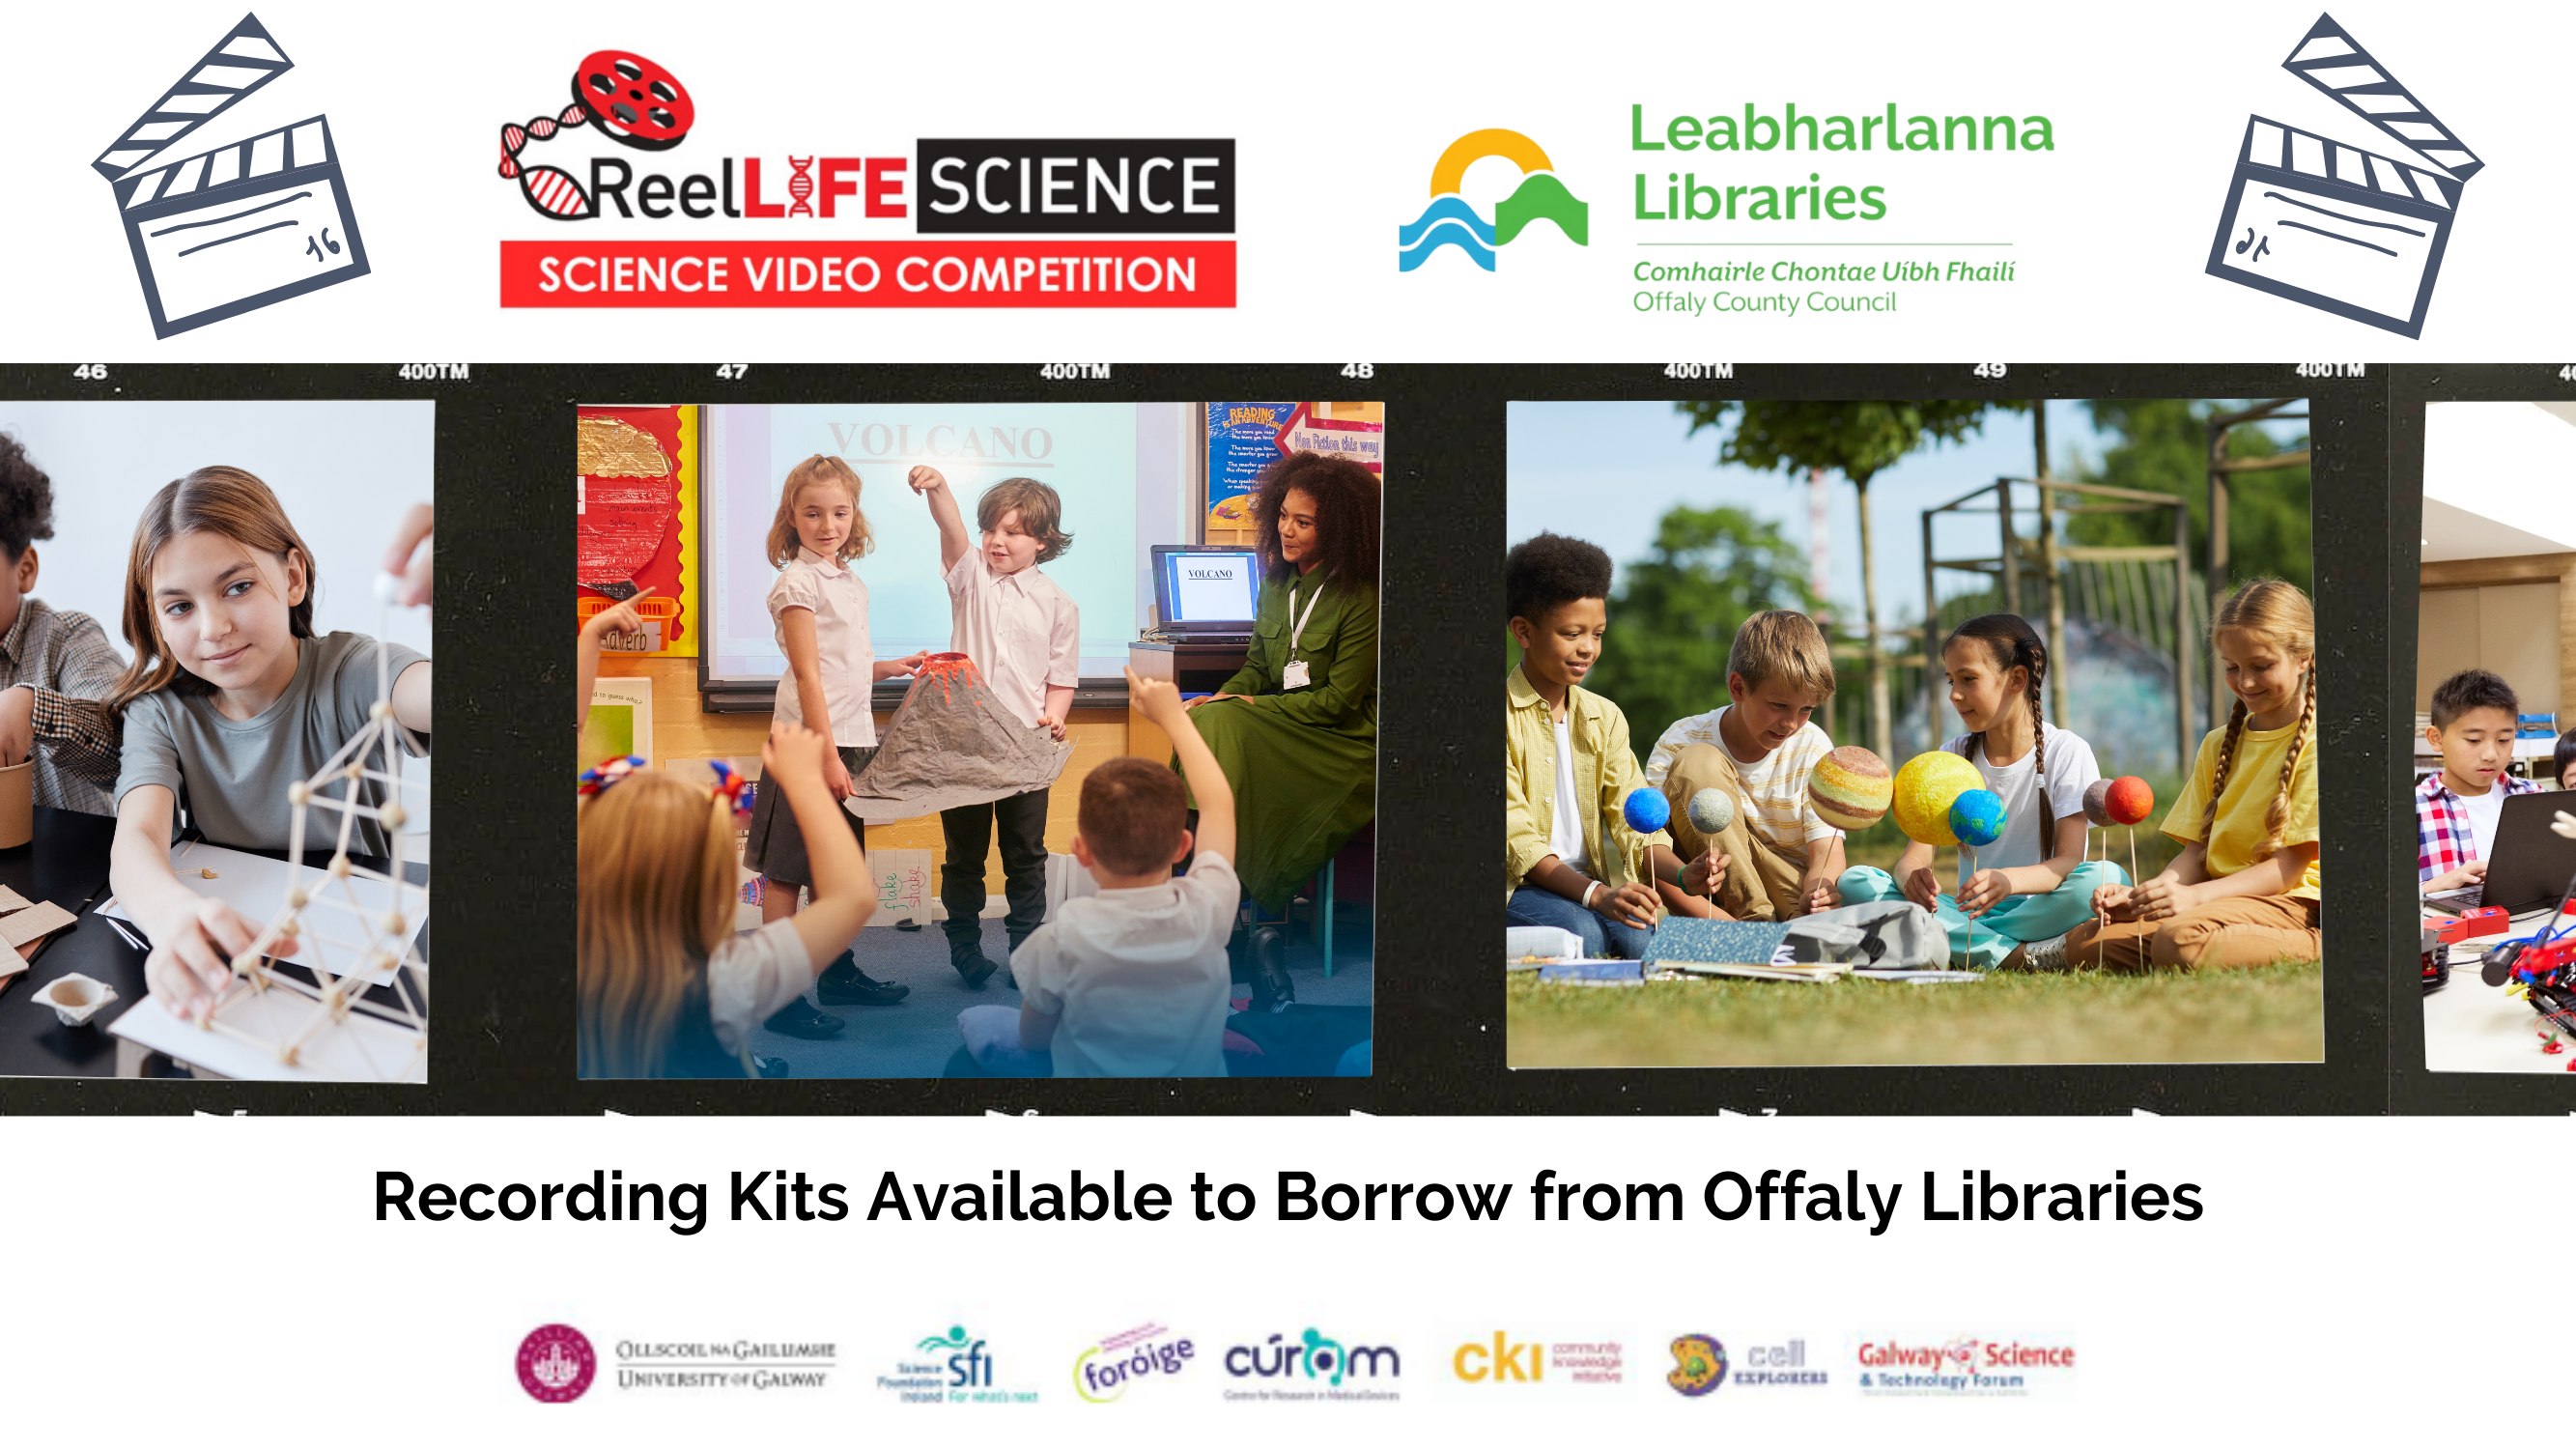 Offaly Libraries collaborate with ReelLIFE Science on Exciting STEM  Campaign - Offaly County CouncilOffaly County Council